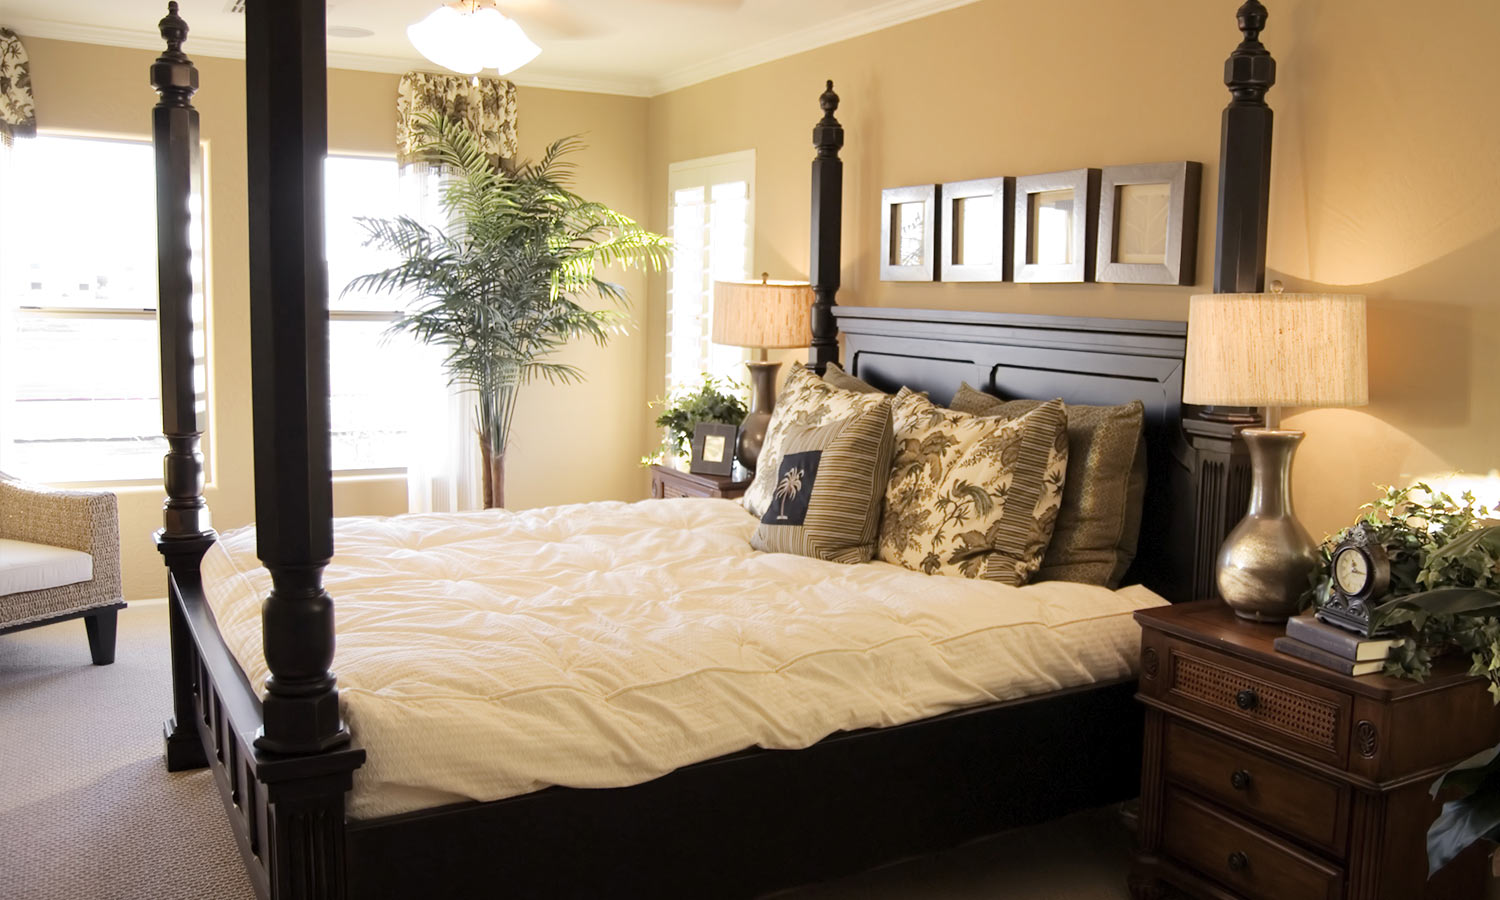 75 Diffe Types Of Beds For Every, 4 Corner Bed Frame